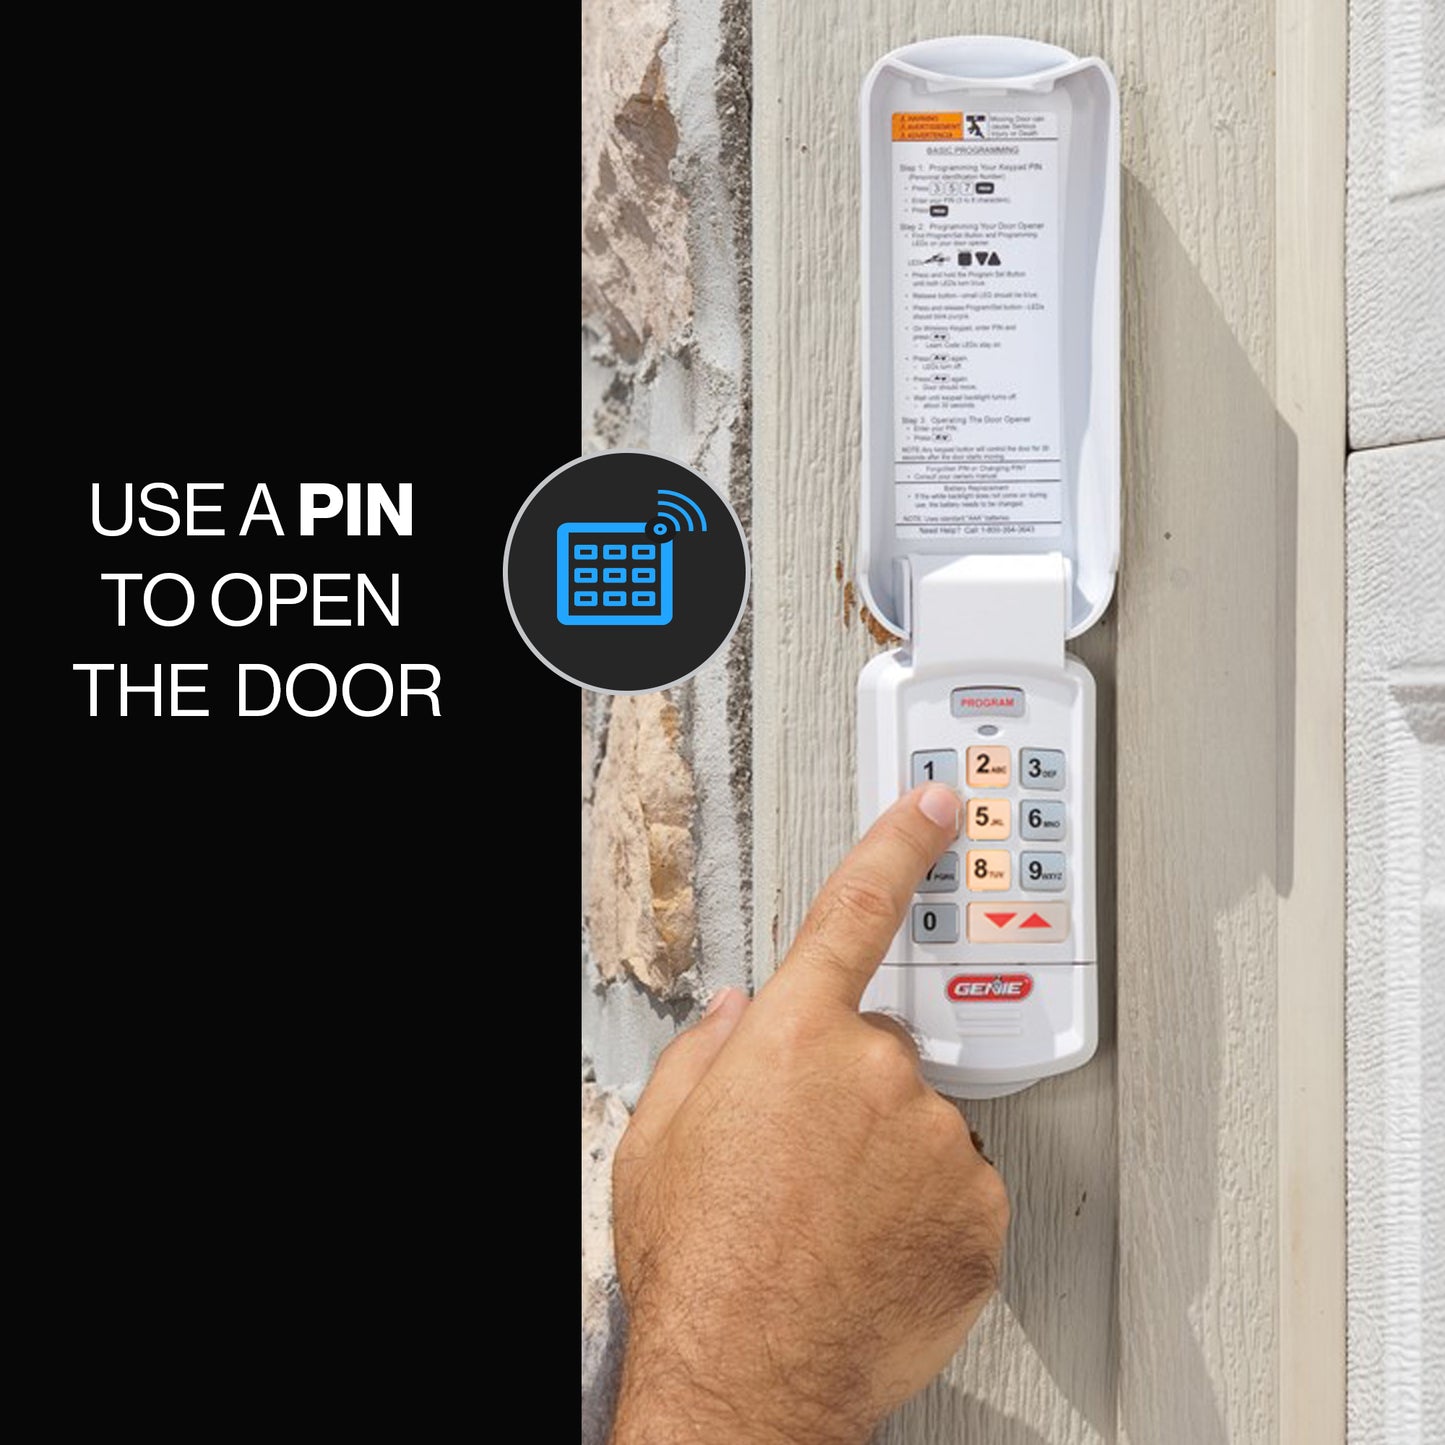 Use a pin to open the garage door with this Genie Wireless Keypad